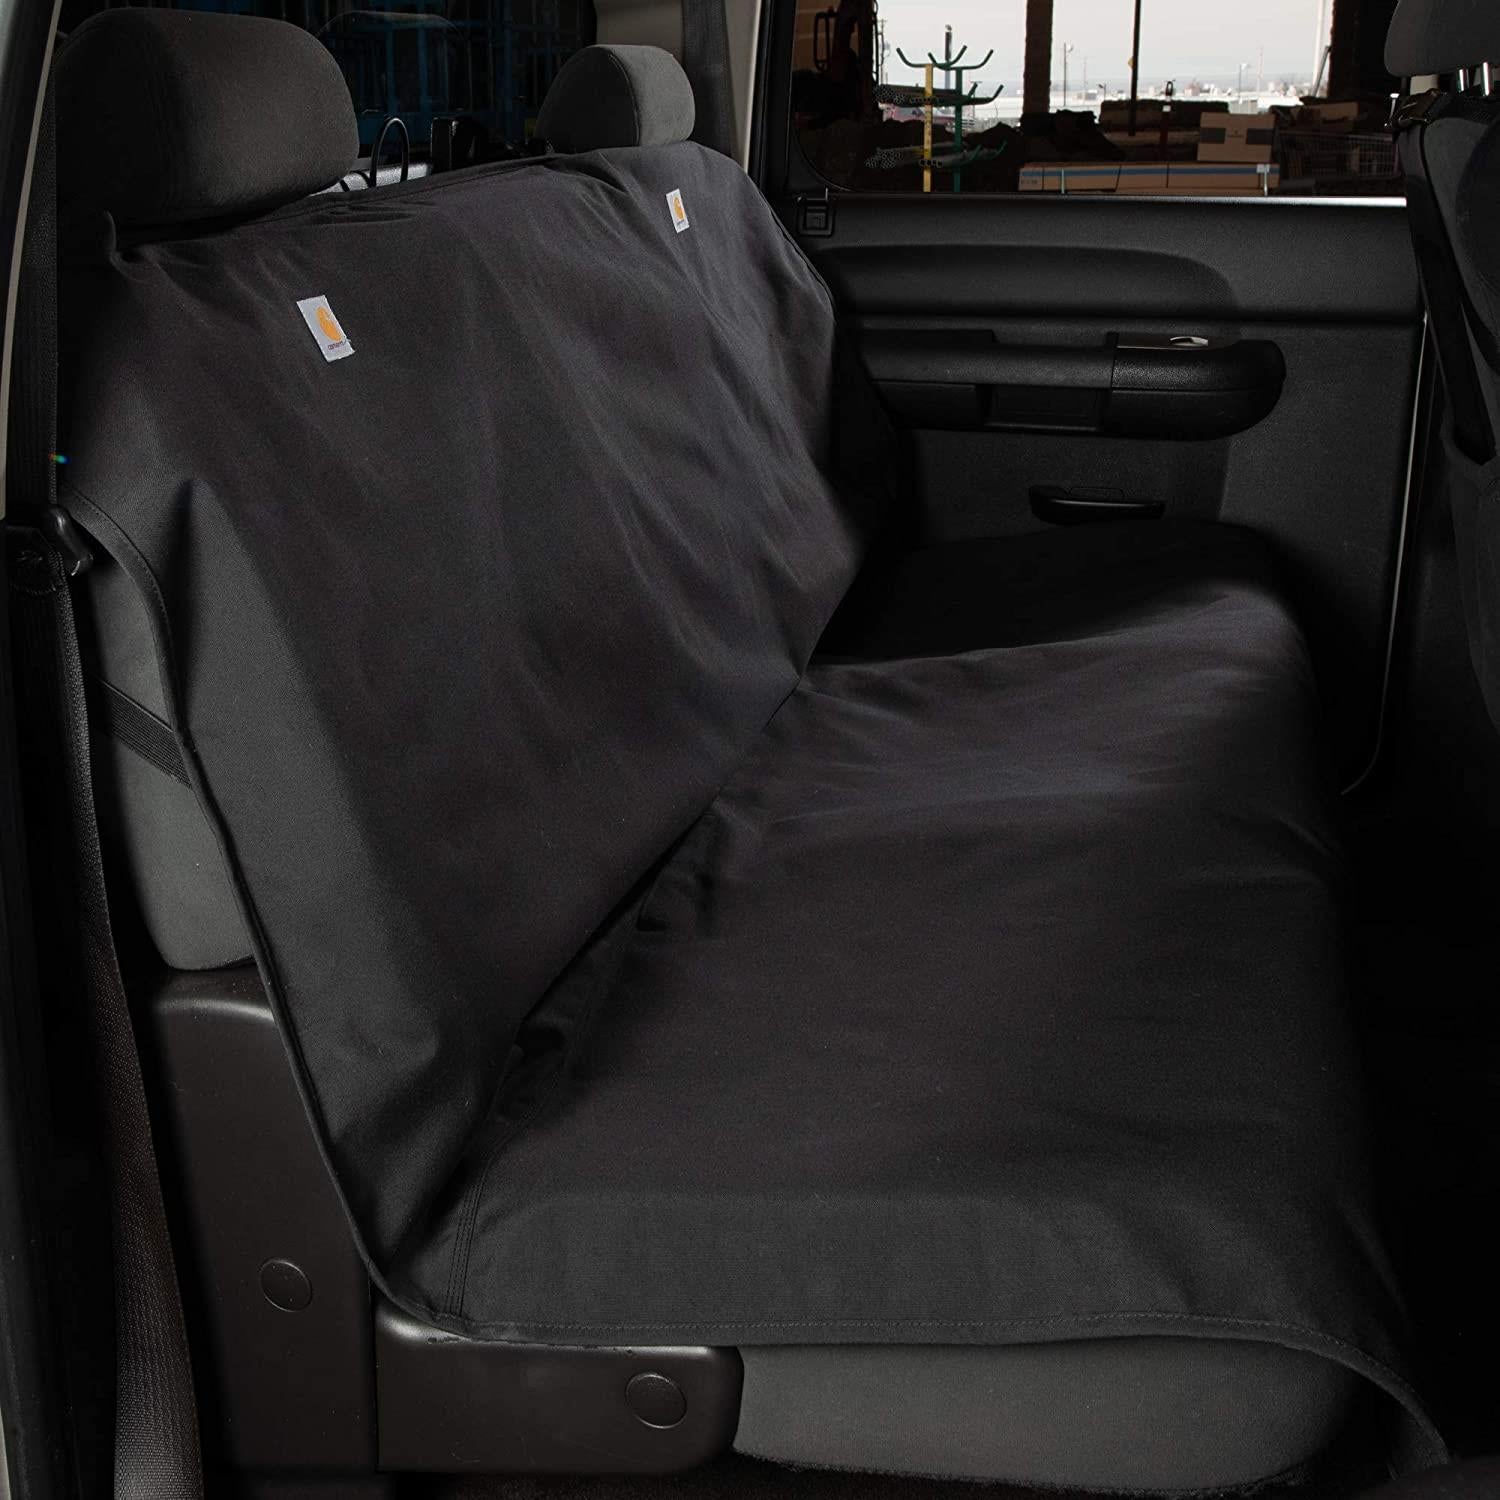 Carhartt Universal Bench Seat Cover | ruggednorth.ca